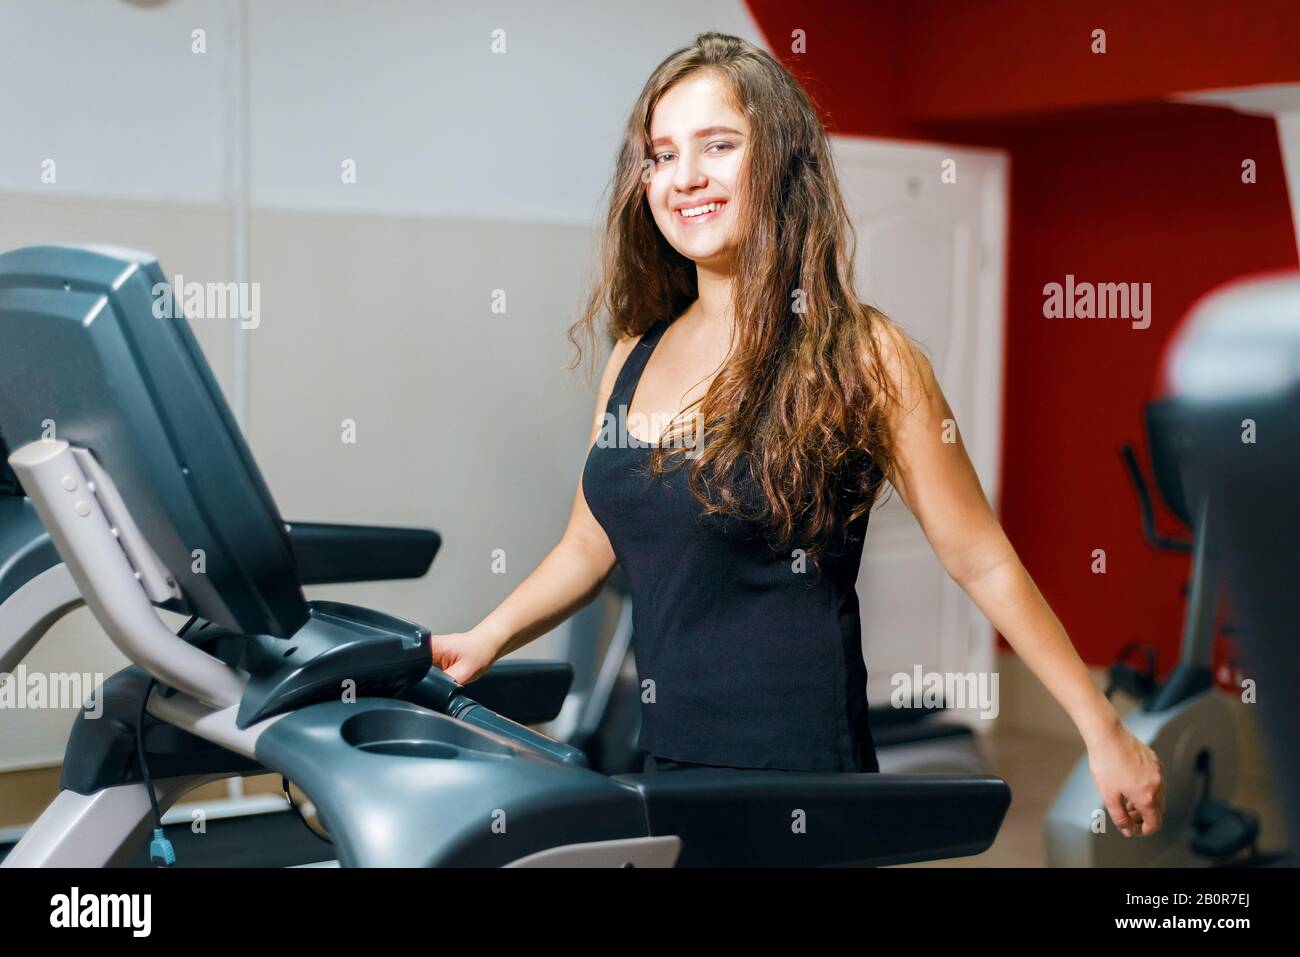 young beautiful girl trains on treadmill. sports woman engaged in fitness. aerobic training Stock Photo